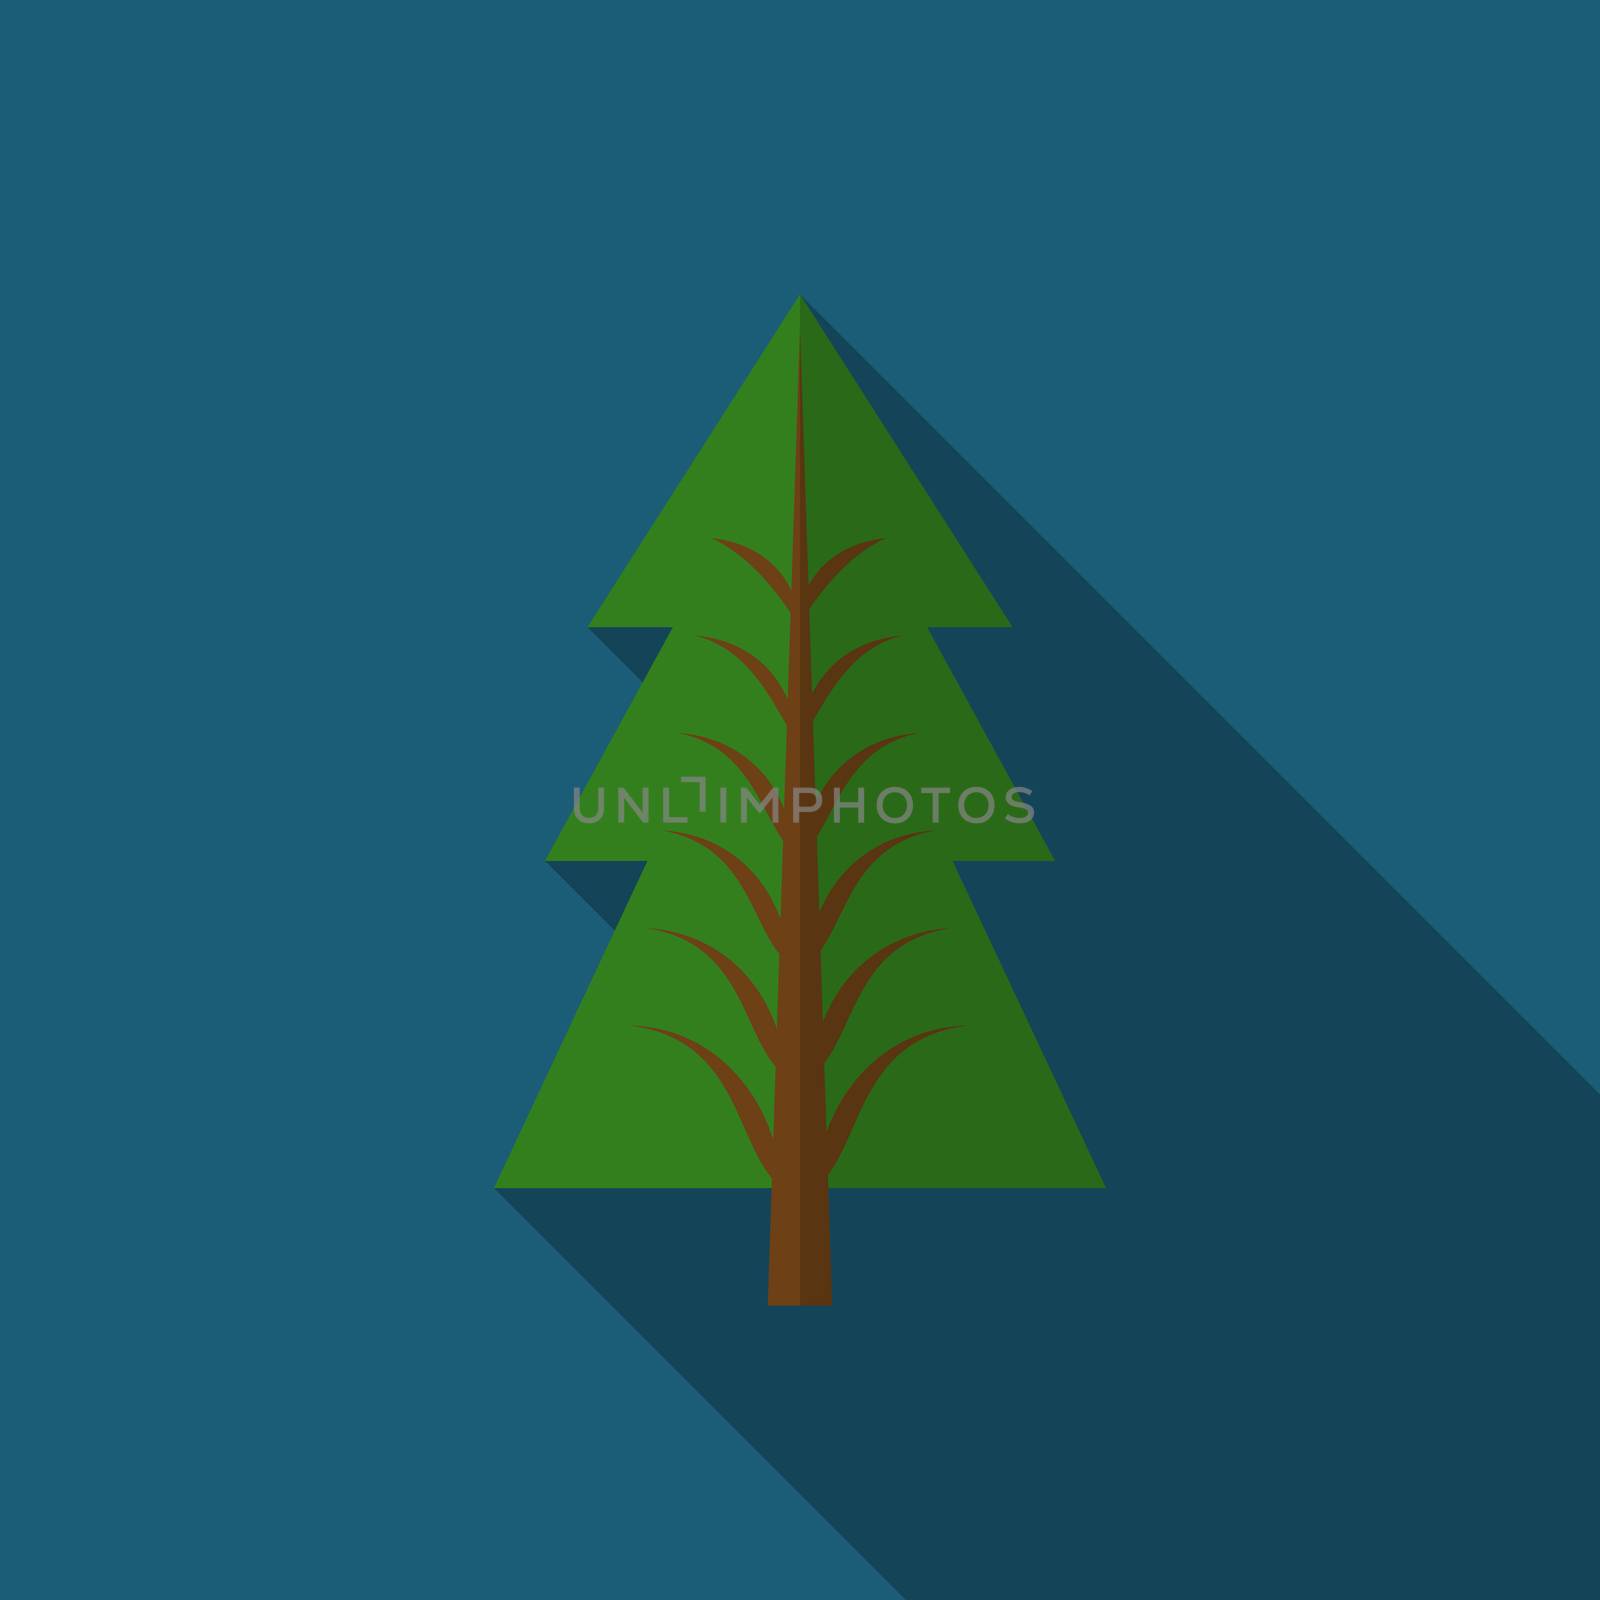 Flat design modern vector illustration of pine tree icon, with long shadow.